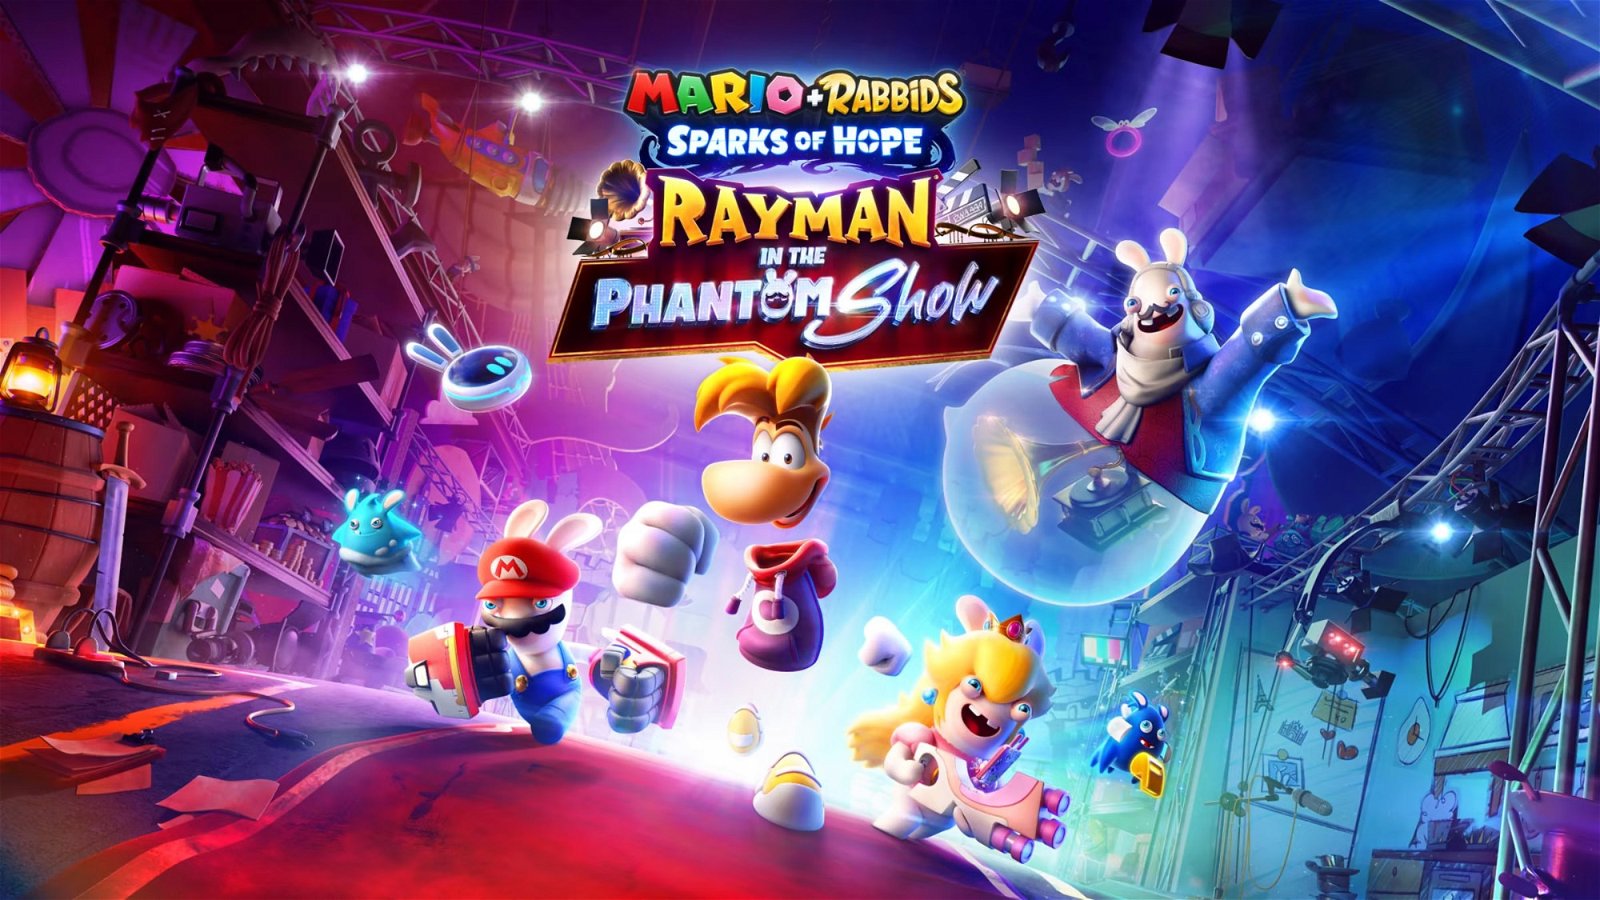 Mario + Rabbids: Sparks of Hope - Rayman in the Phantom Show | Recensione